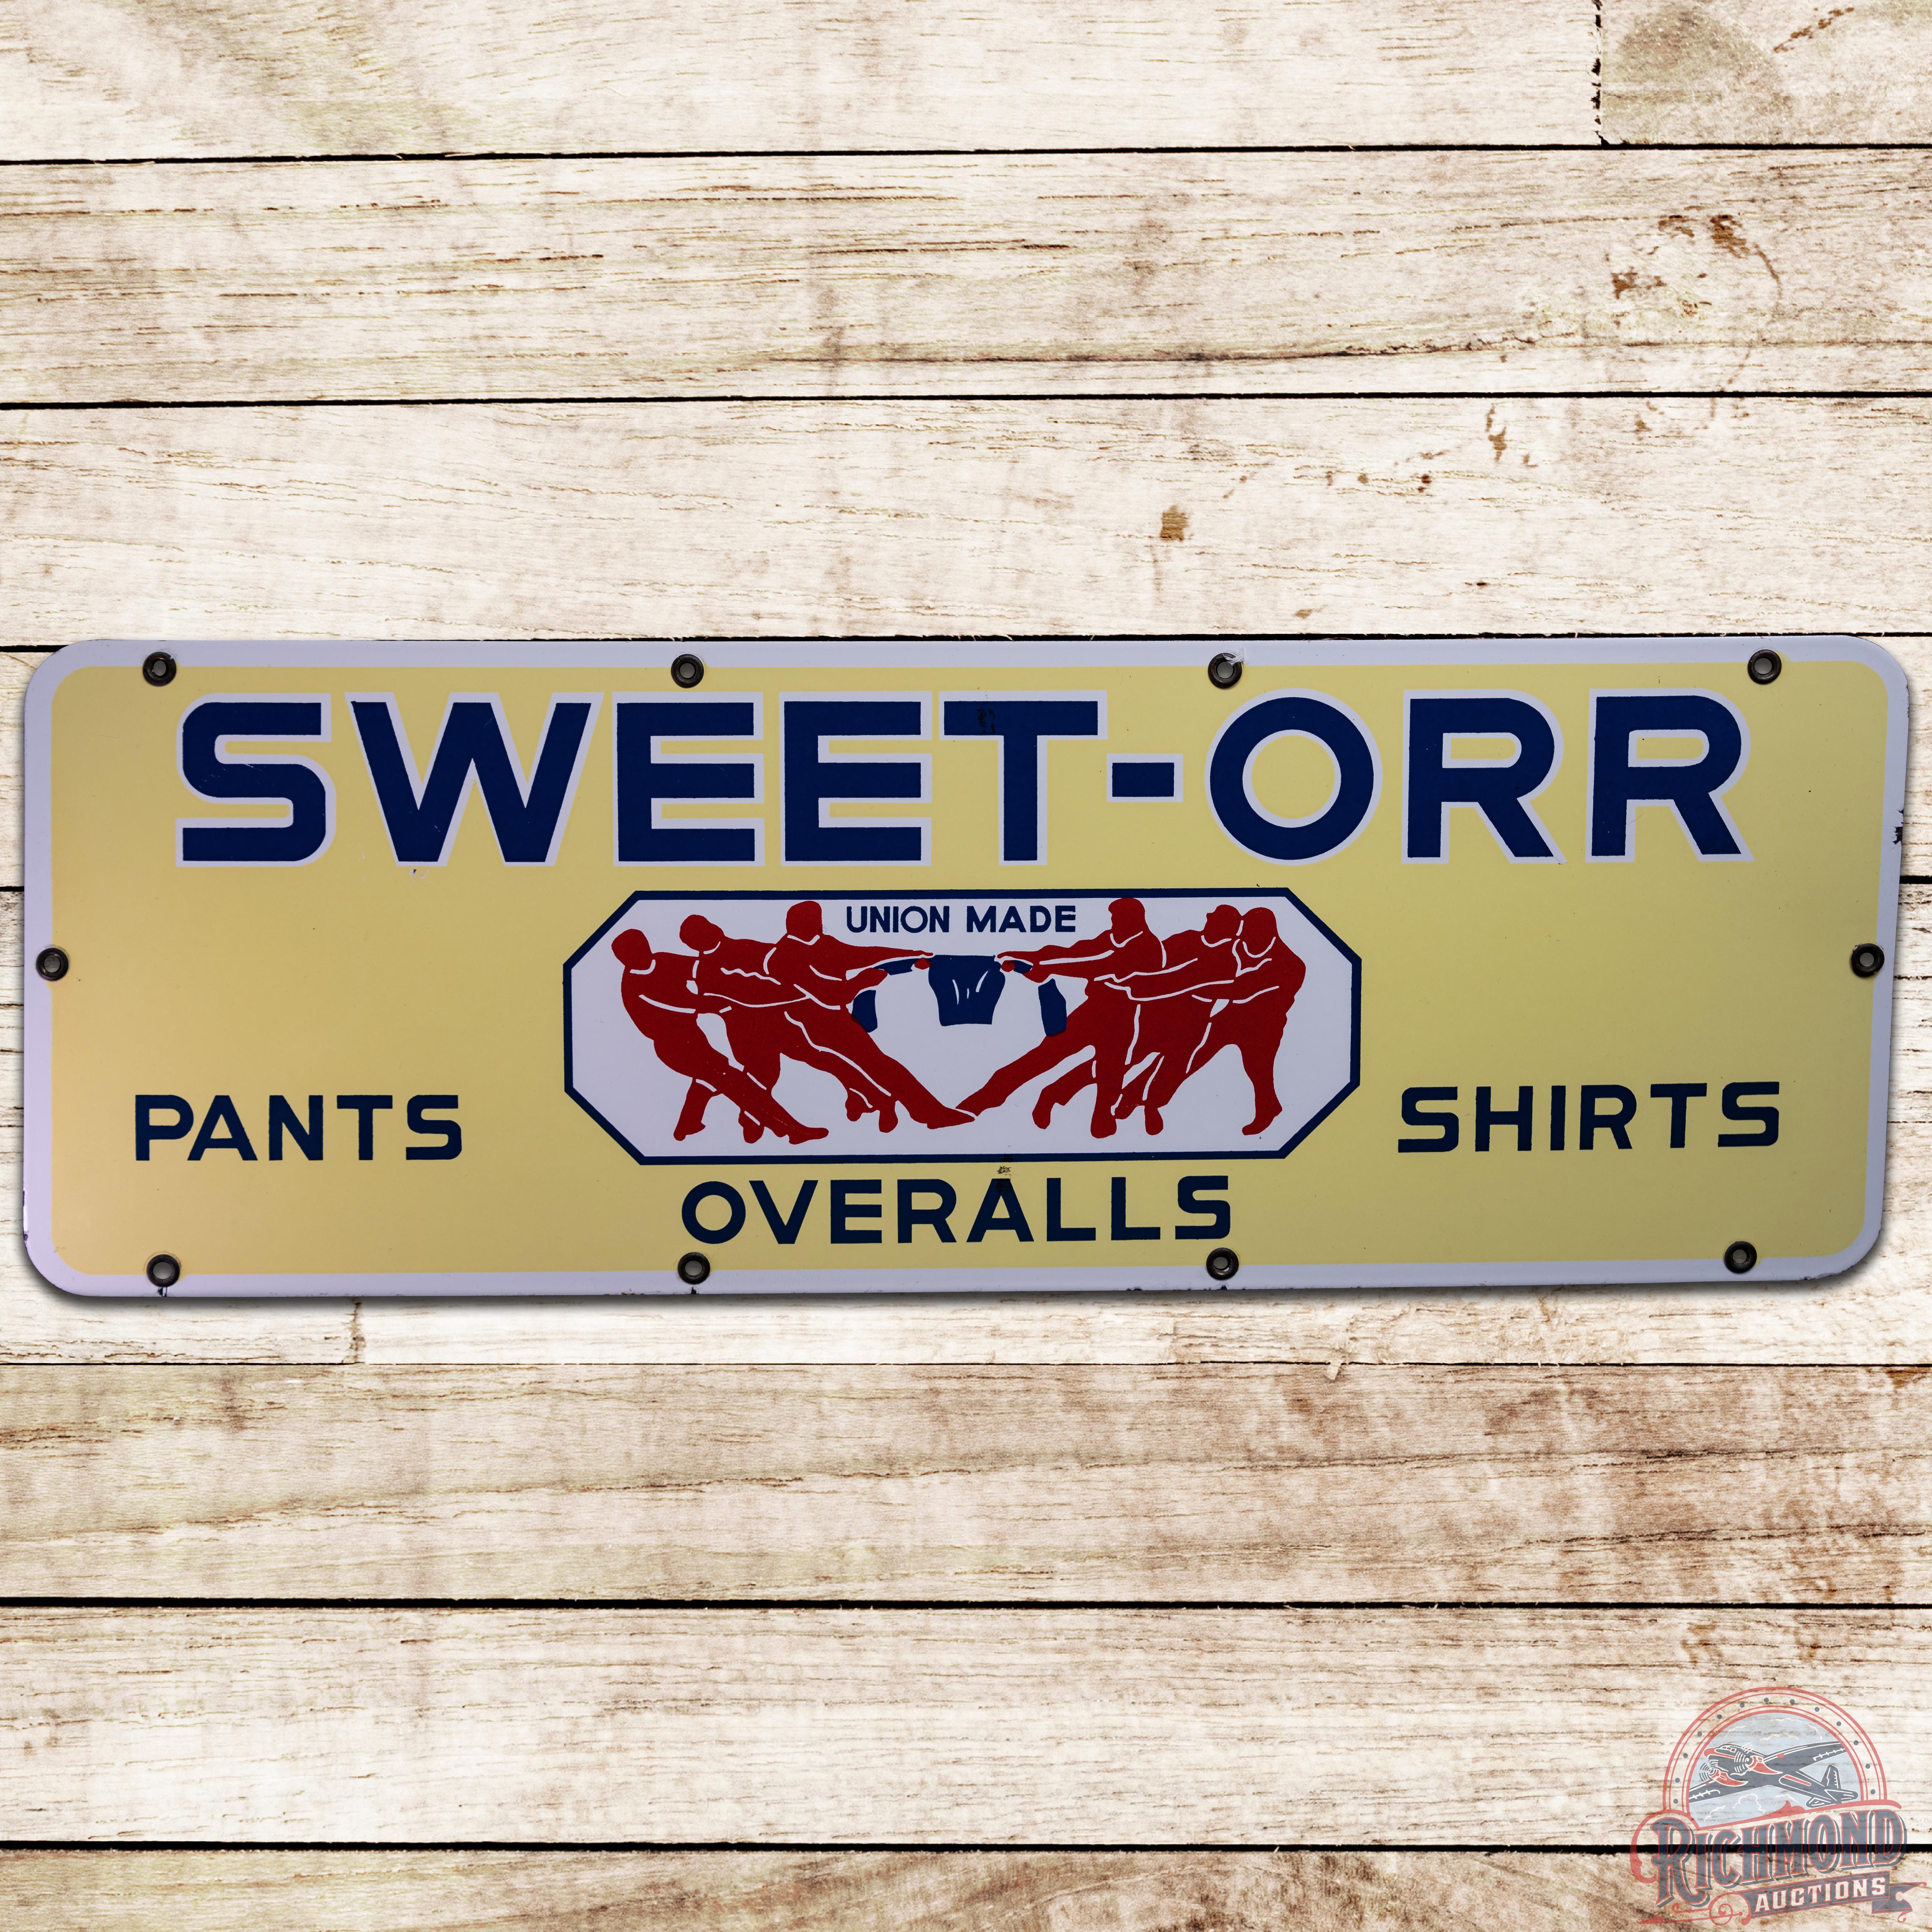 Sweet-Orr Union Made Pants Overalls Shirts SSP Sign - 9C